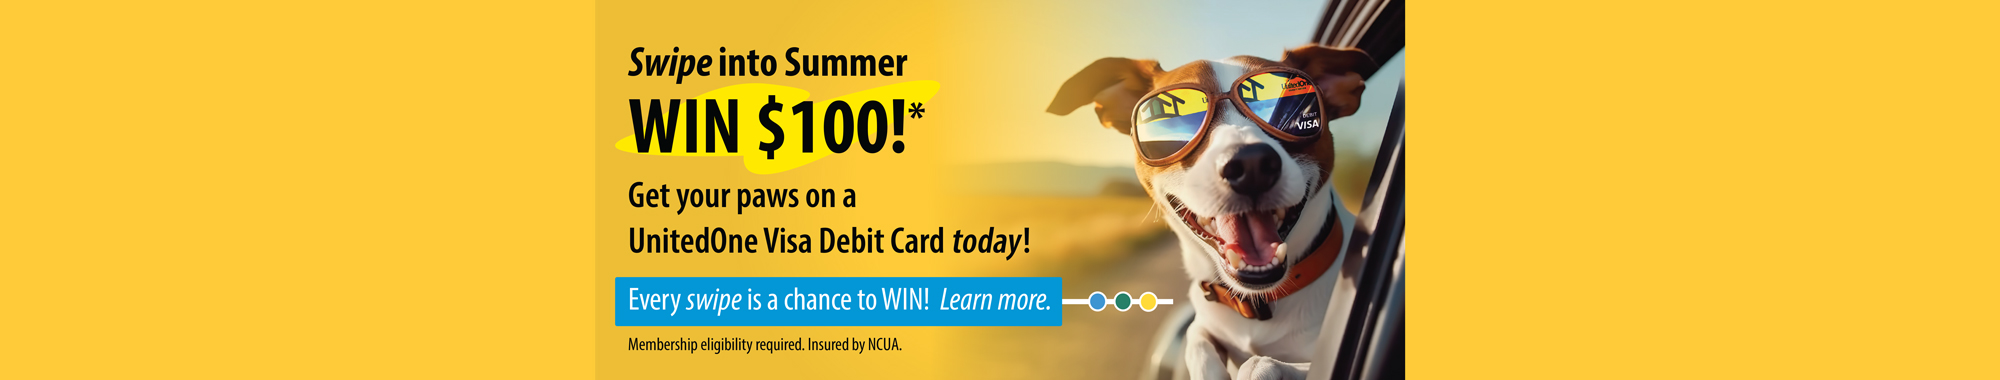 Swipe into Summer - WIN $100* - Get your paws on a UnitedOne Visa Debit Card today! Every swipe is a chance to WIN! Learn more.